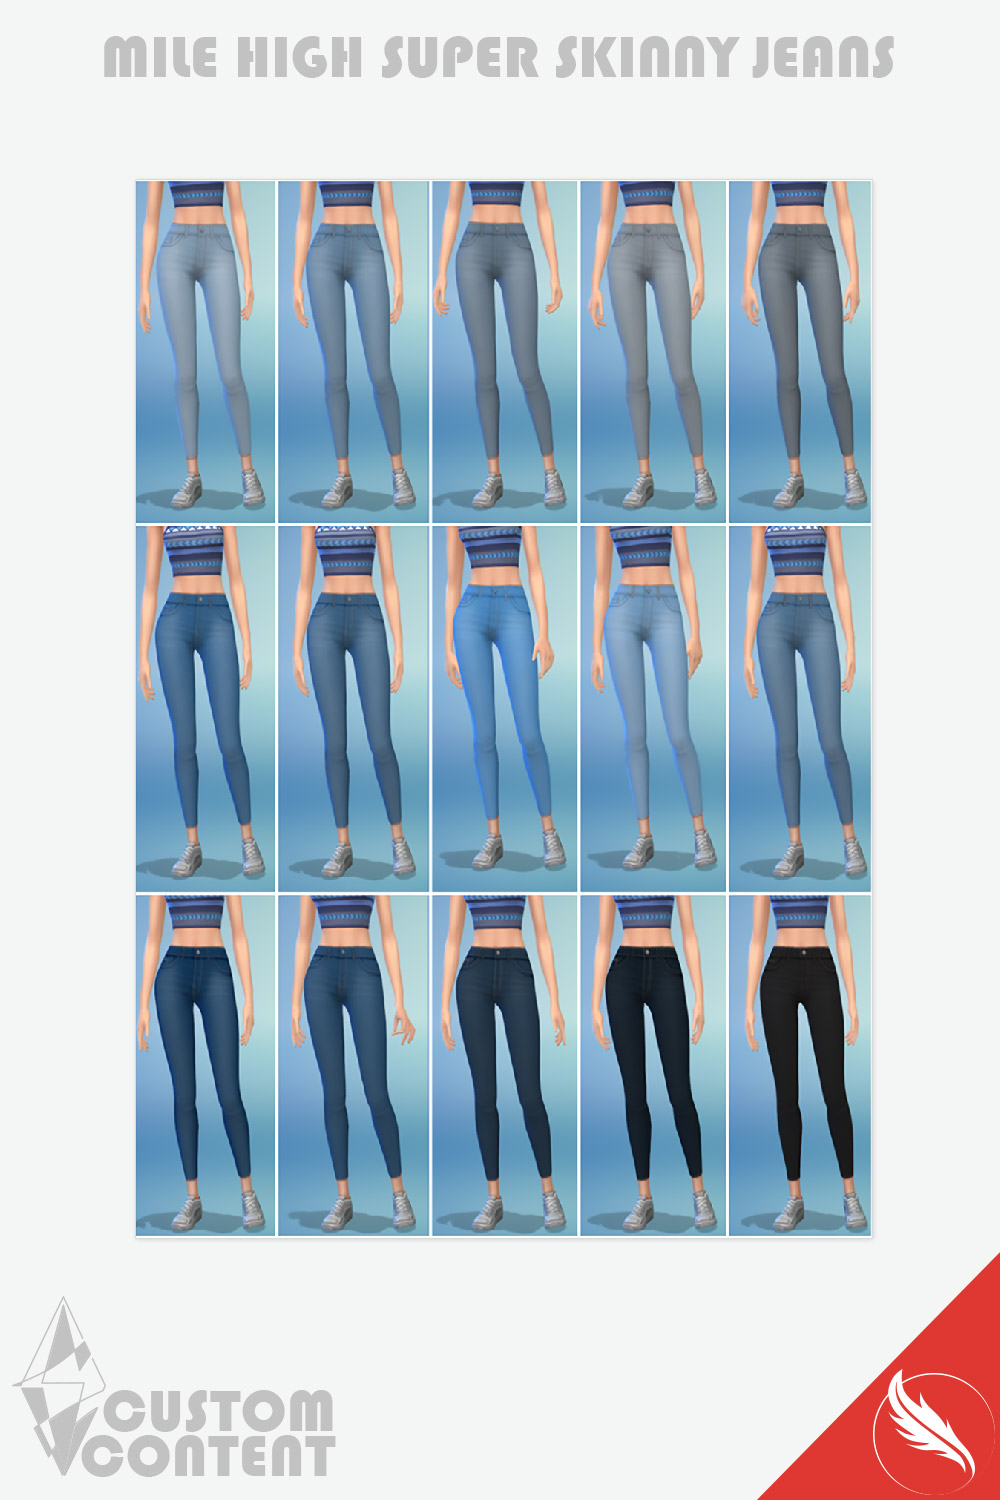 The sims 4 CC Skinny Jeans